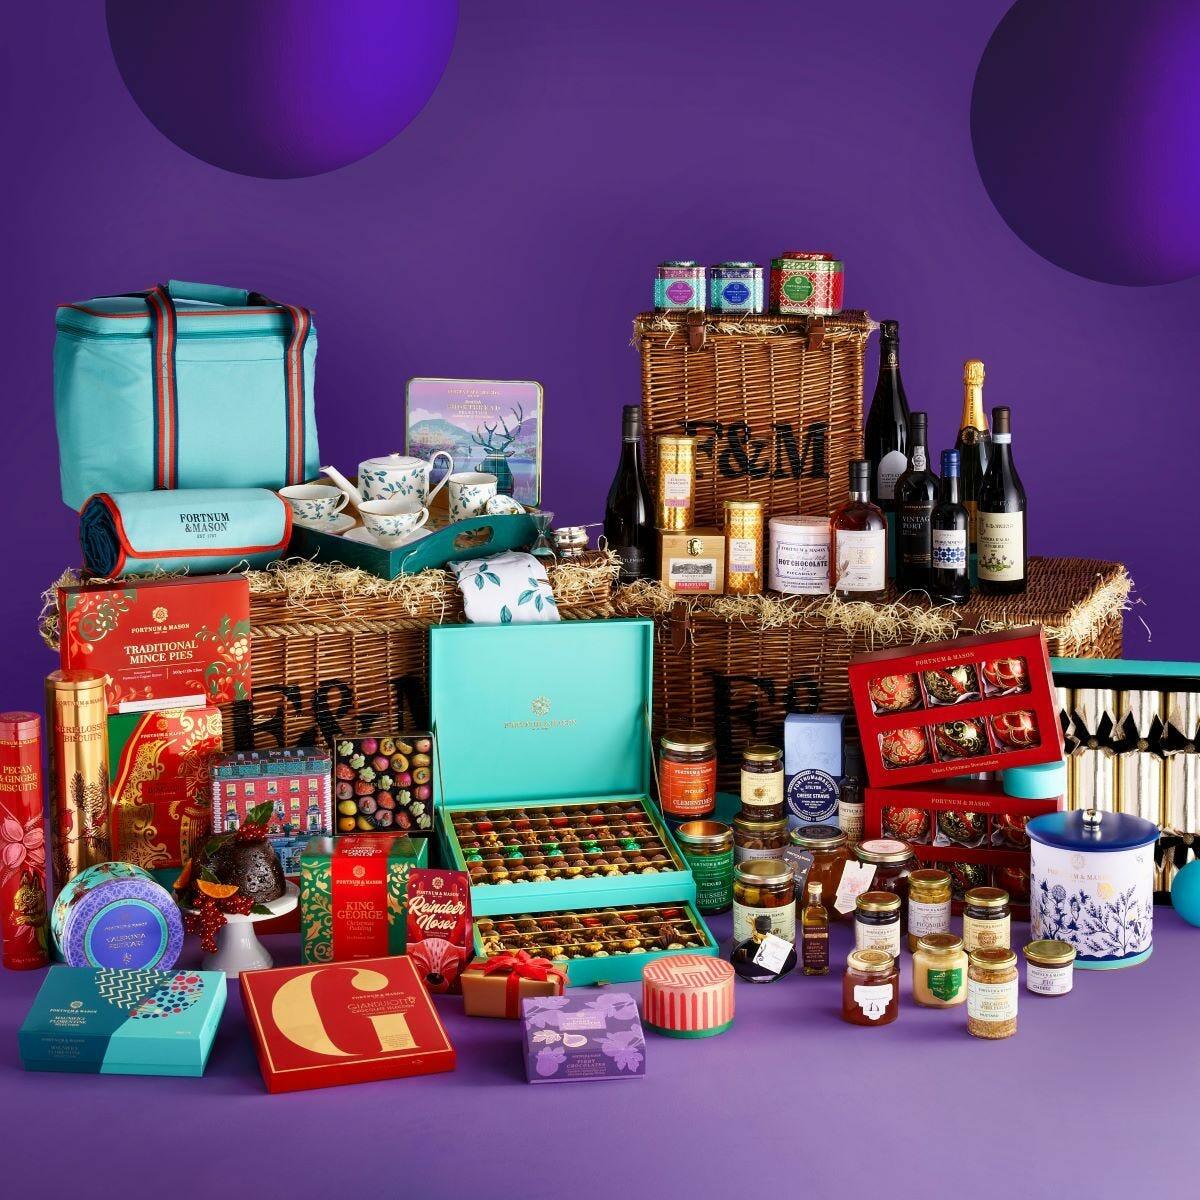 The Sovereign Hamper, Biscuits, Hot Chocolate, Teas, Marmalades, Puddings, Preserves, Coffee, Champagne, Cheese, Mustard, Fortnum & Mason